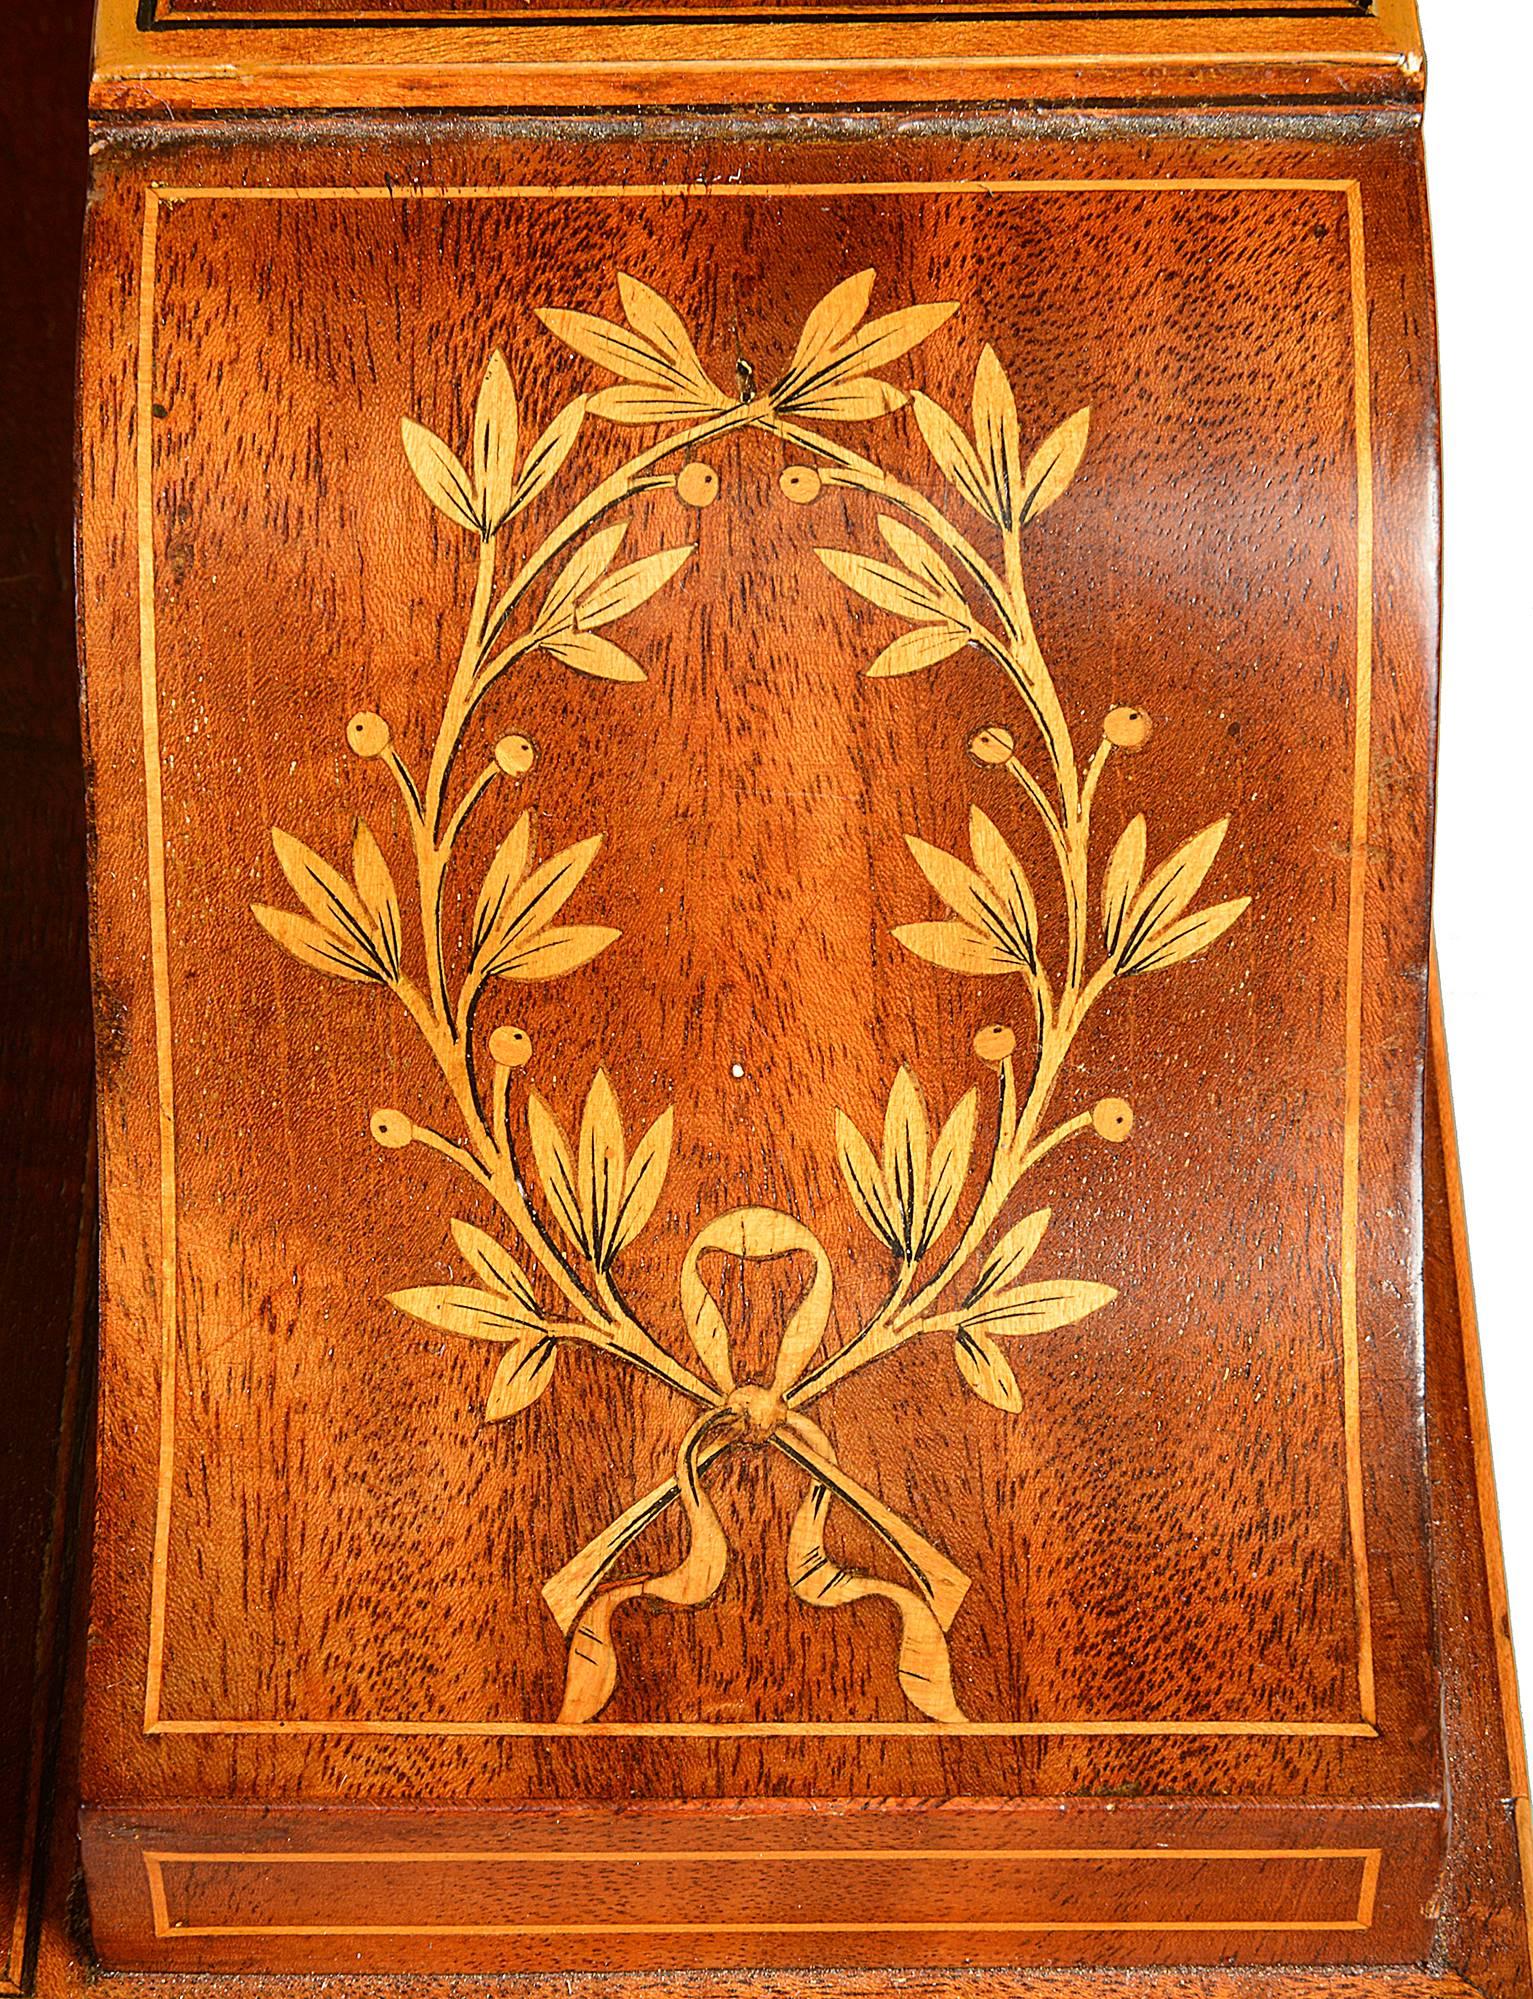 19th Century Sheraton Revival Inlaid Desk In Excellent Condition For Sale In Brighton, Sussex